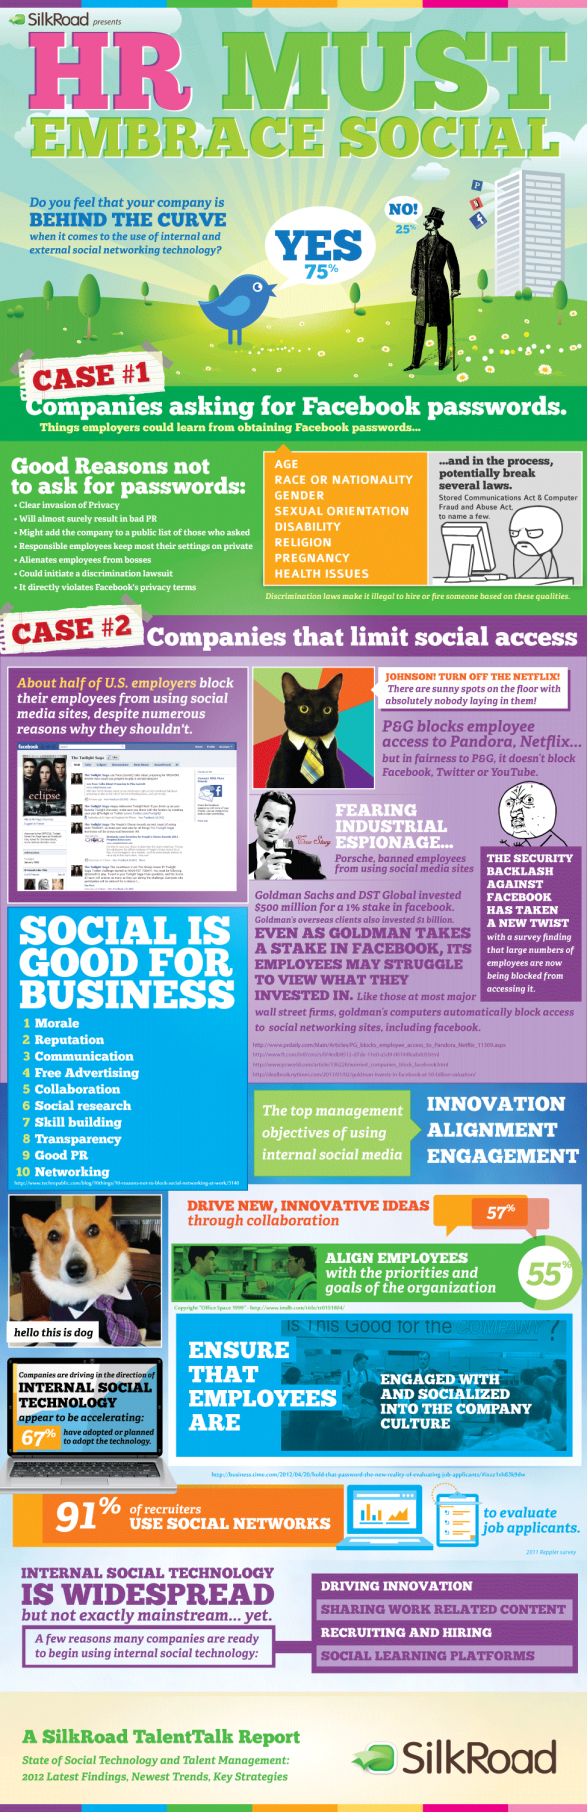 Why HR Must Embrace Social Media